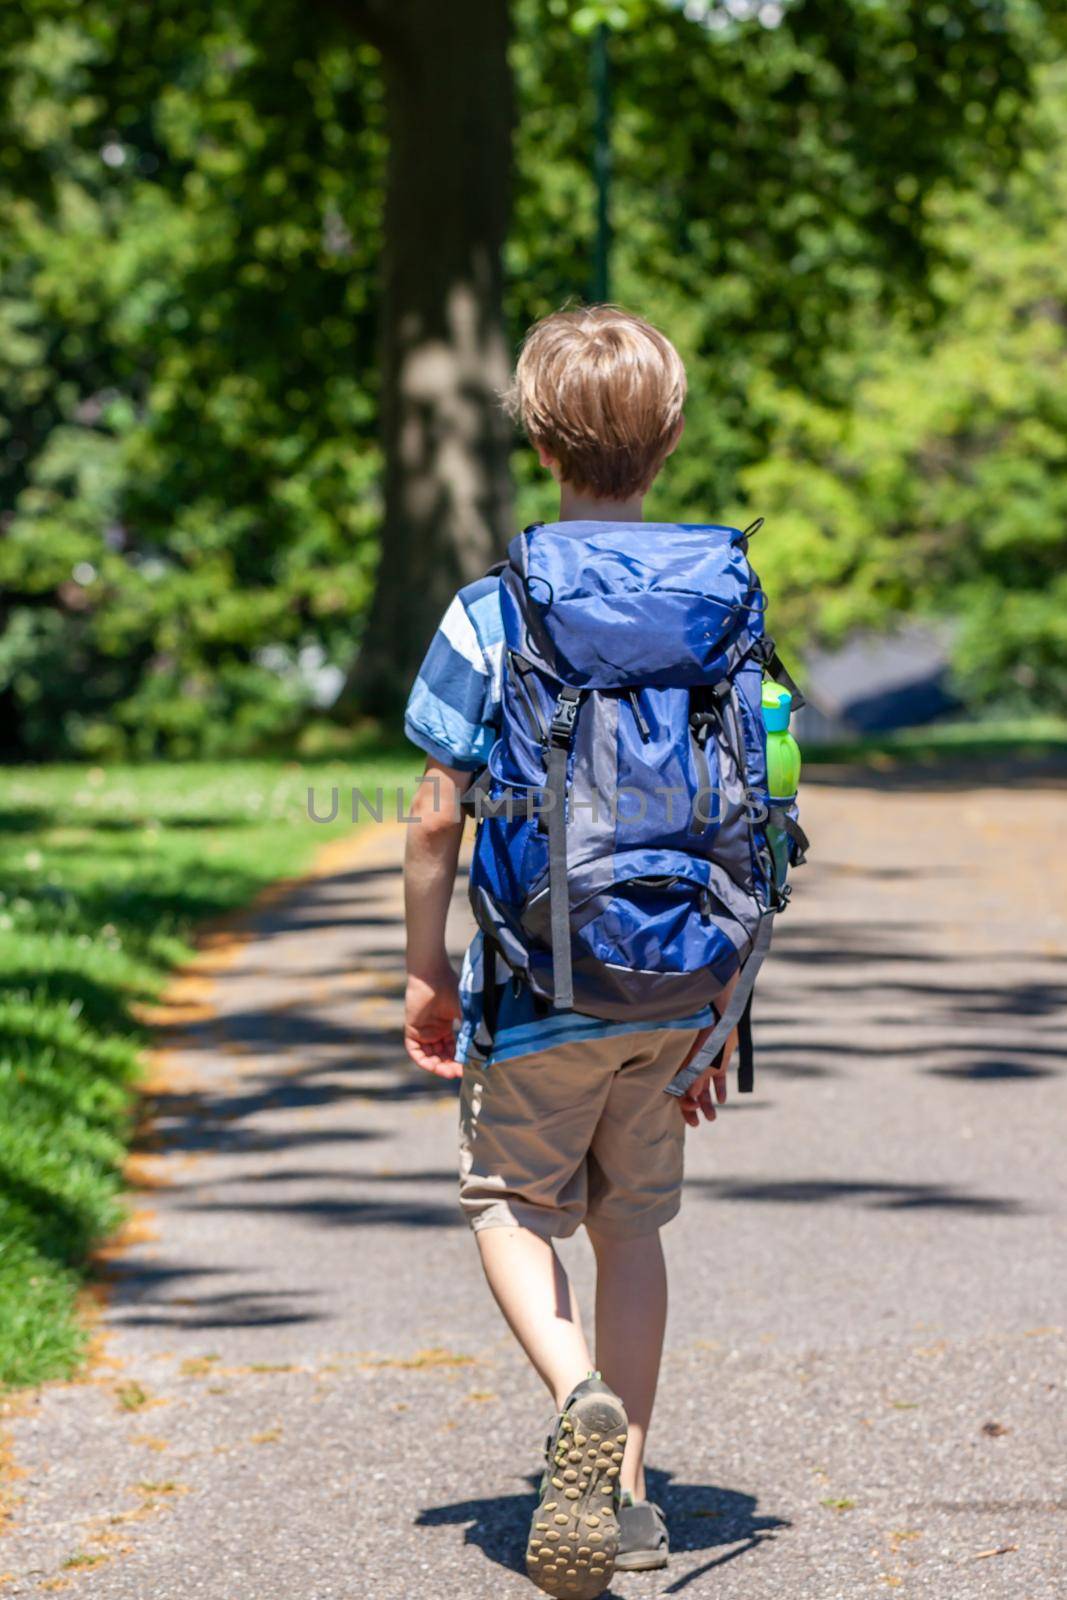 Boy hiking in the park with huge rucksack.